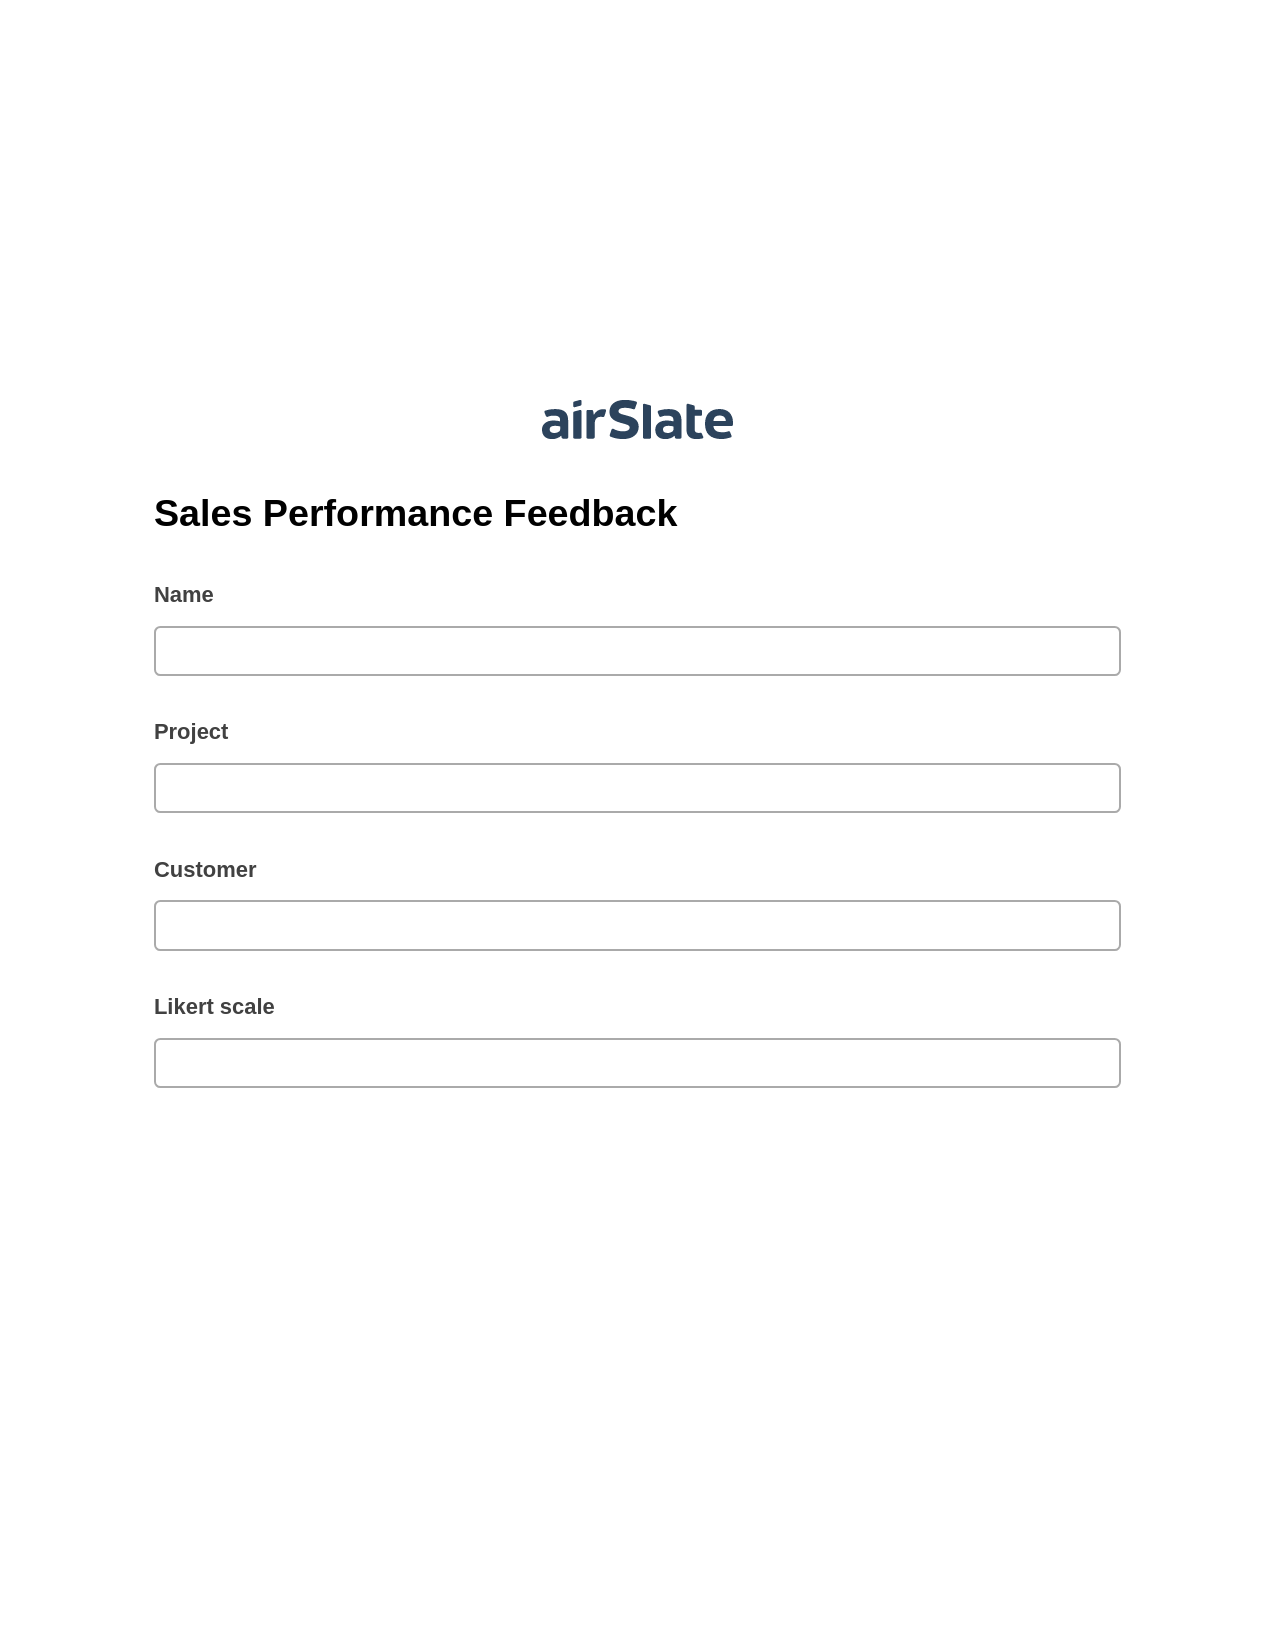 Sales Performance Feedback Pre-fill Slate from MS Dynamics 365 Records Bot, Roles Reminder Bot, Archive to SharePoint Folder Bot